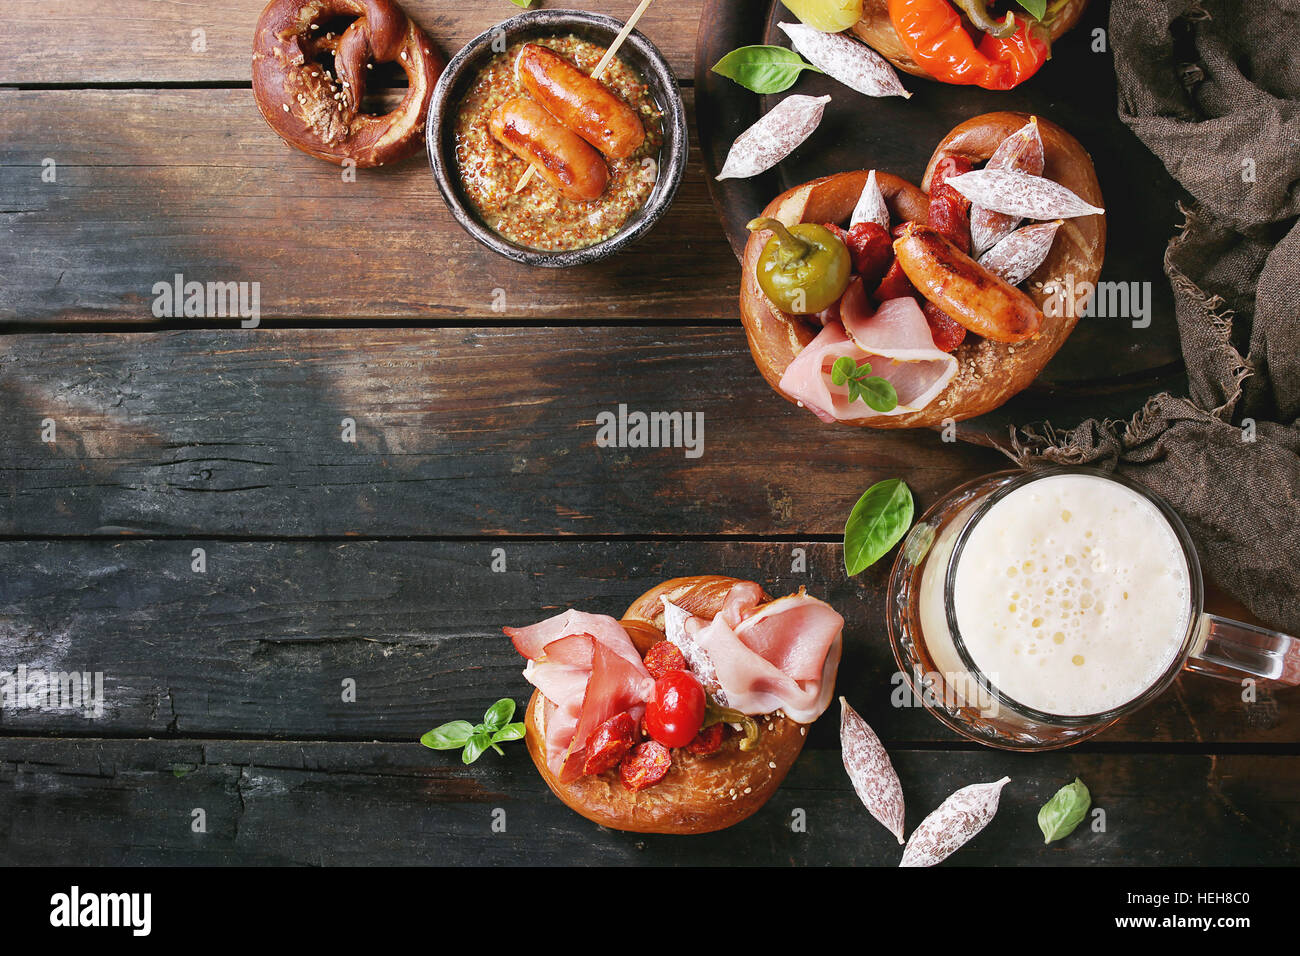 Variety of meat snacks fried sausages, wienerwurst, ham, marinated chili peppers served in salted pretzels with fresh basil and glass of lager beer ov Stock Photo